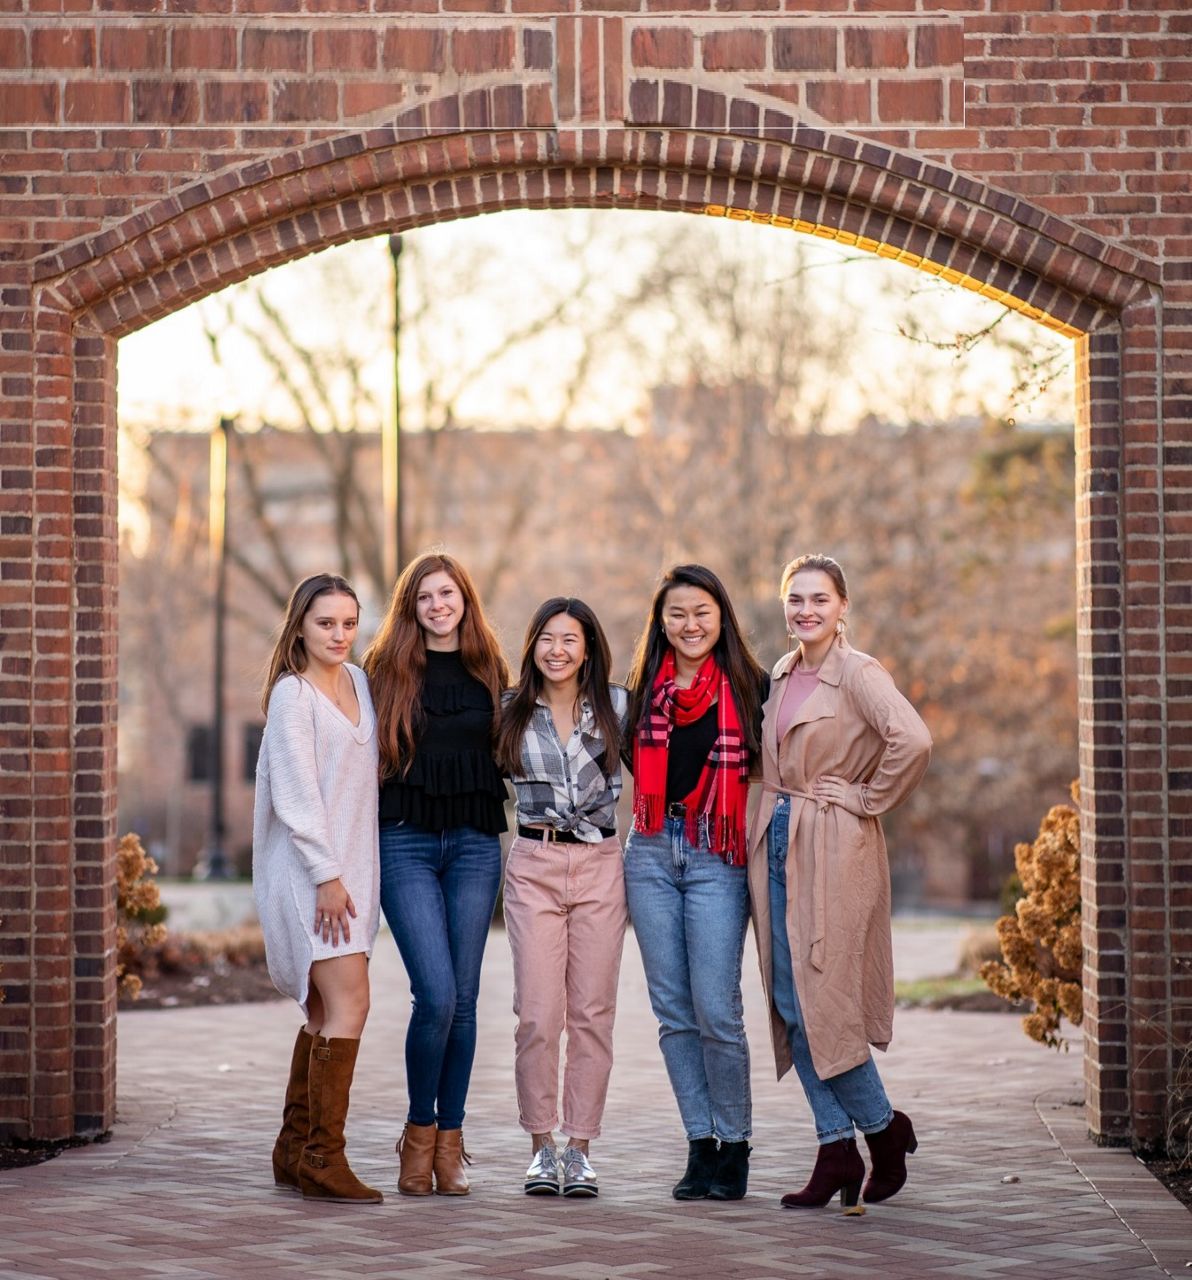 Gabriella Rice (scarf) poses with several of her housemates during her senior year at the University of Dayton. (Photo courtesy of Gabriella Rice)